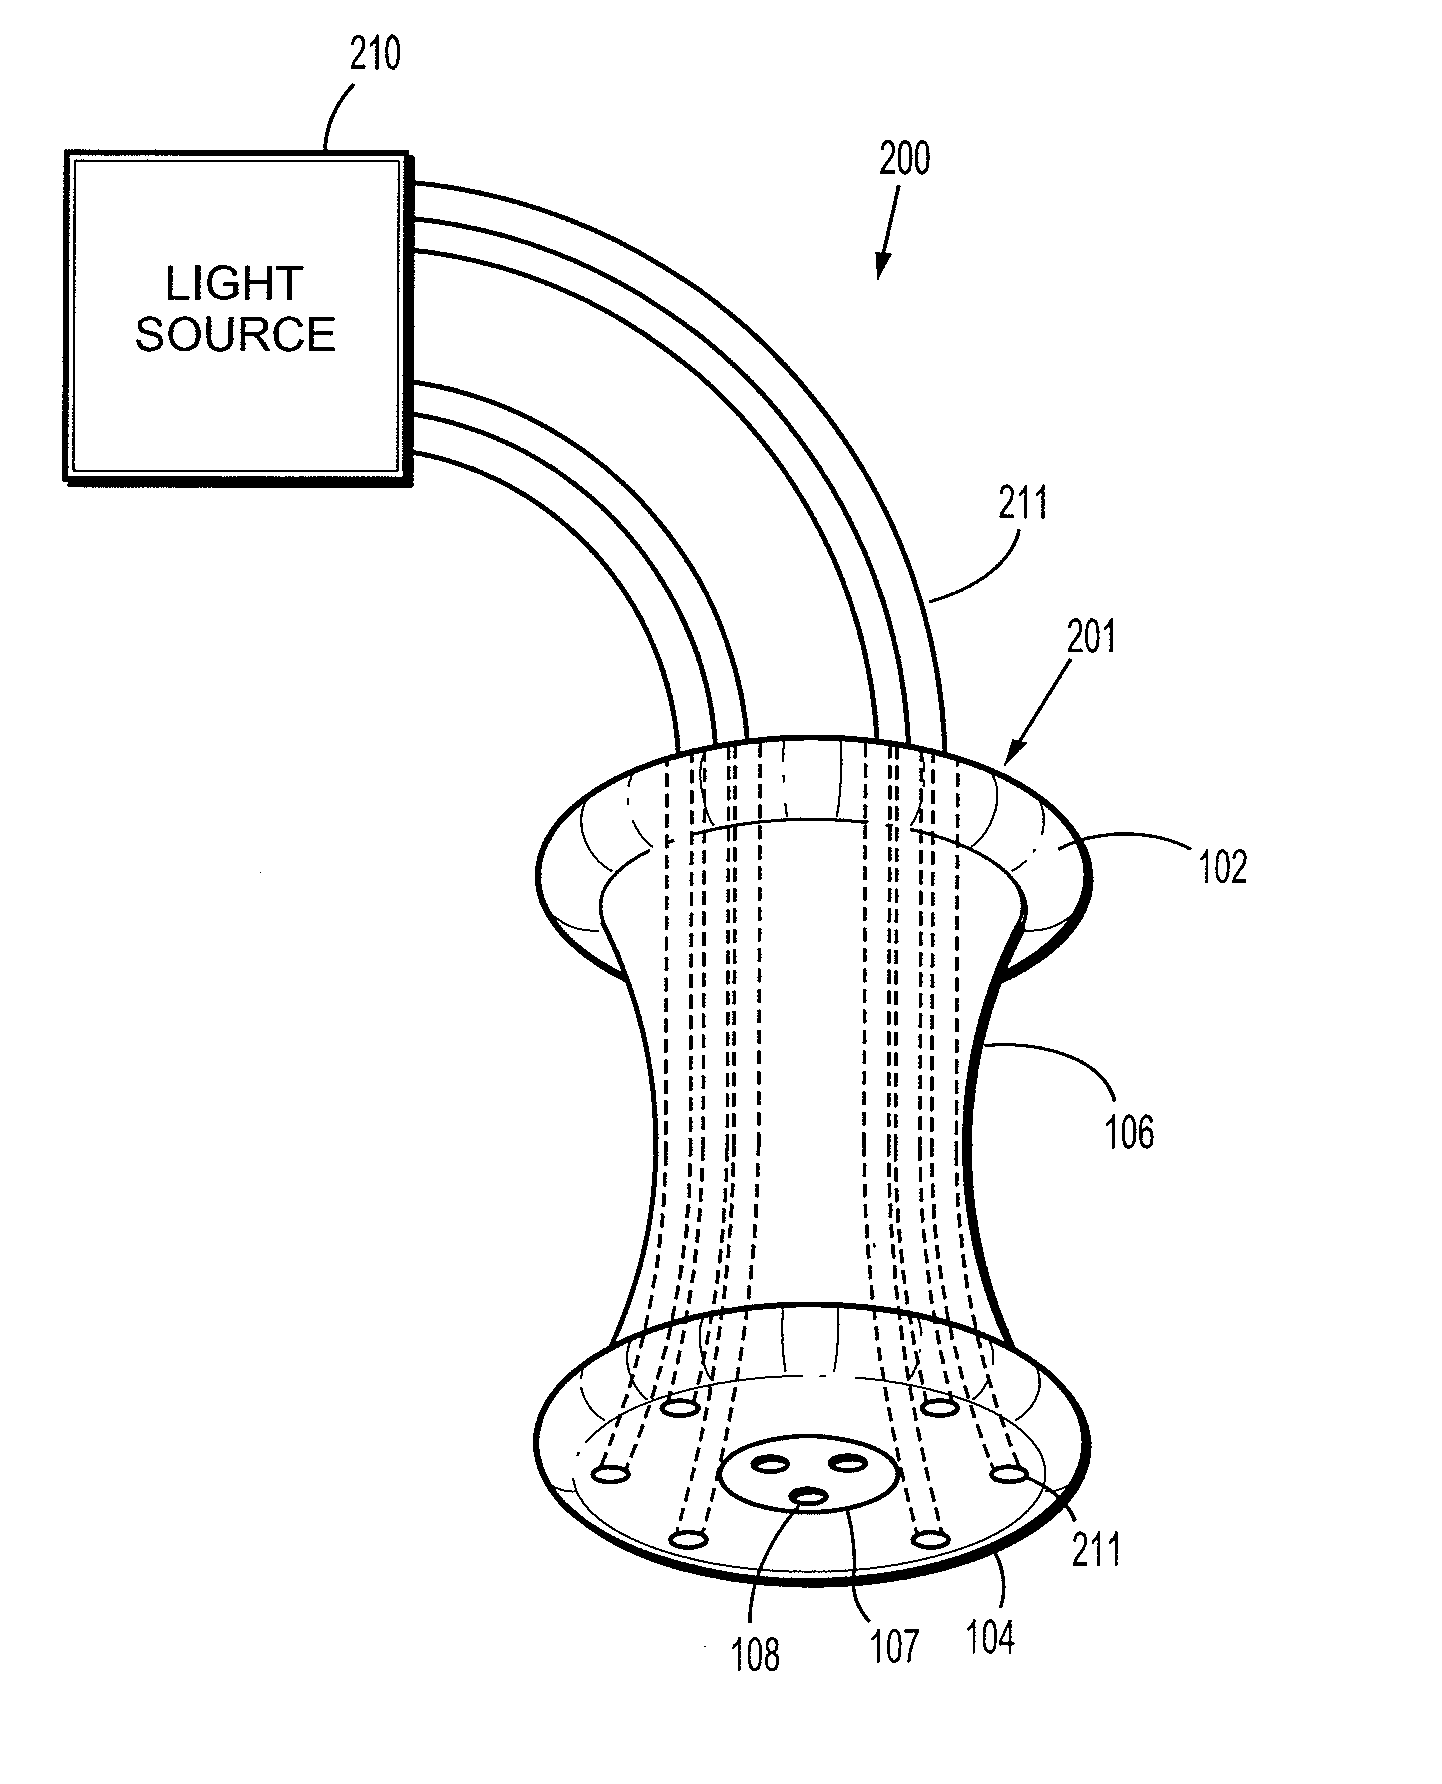 Access device including an integrated light source